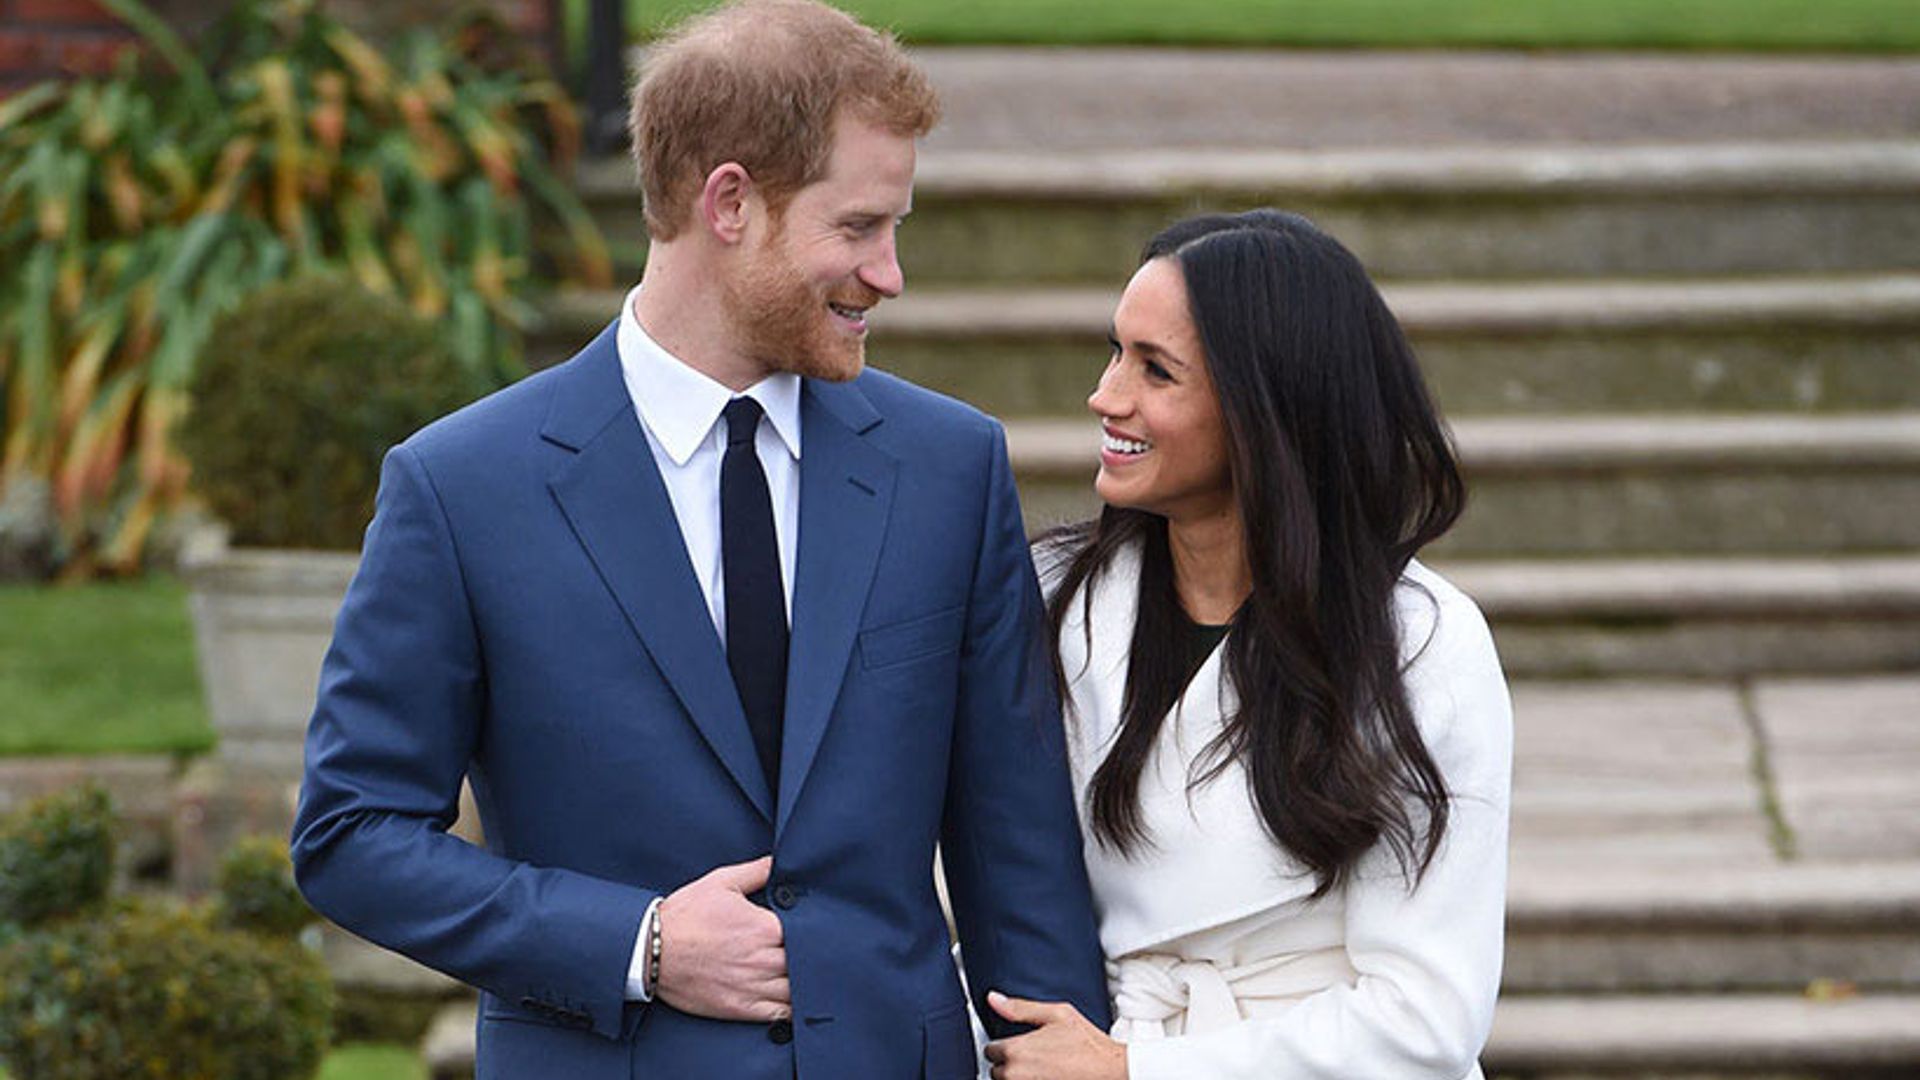 This restaurant has launched a special royal wedding menu